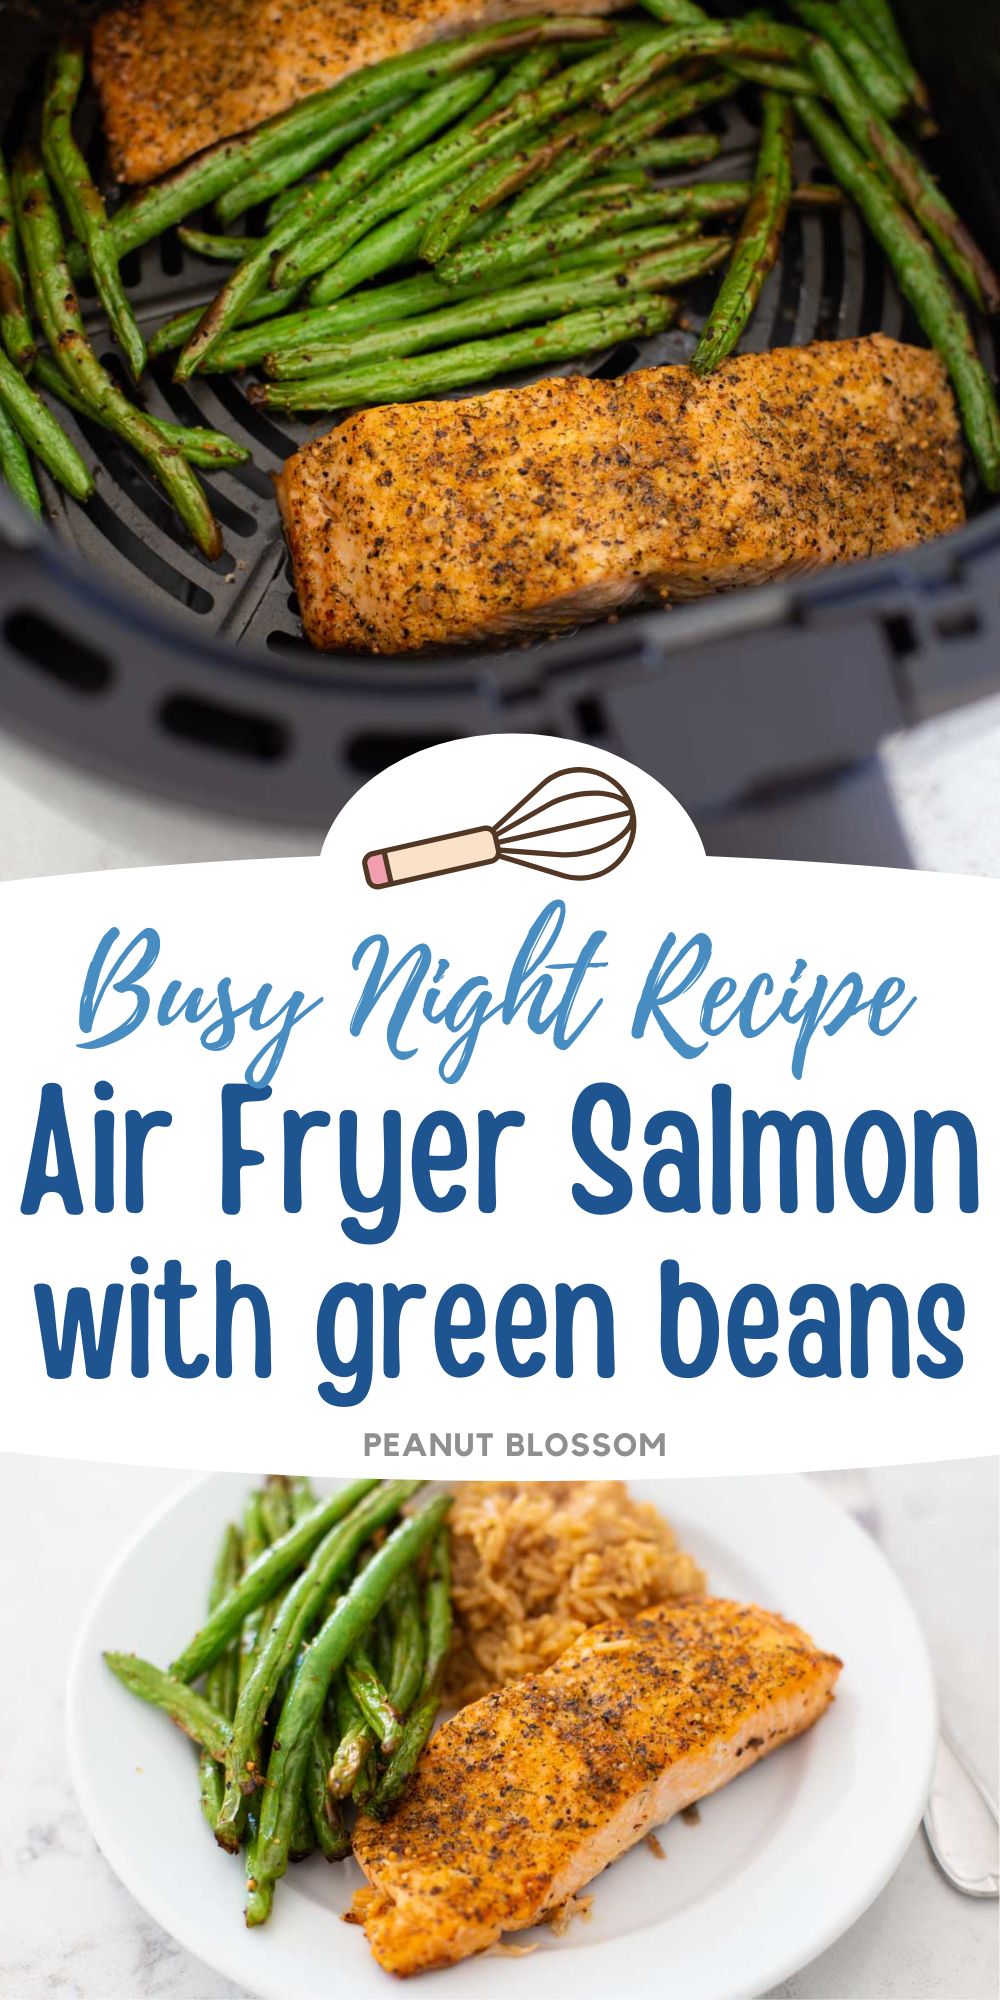 The salmon is shown cooking in an air fryer basket with green beans.